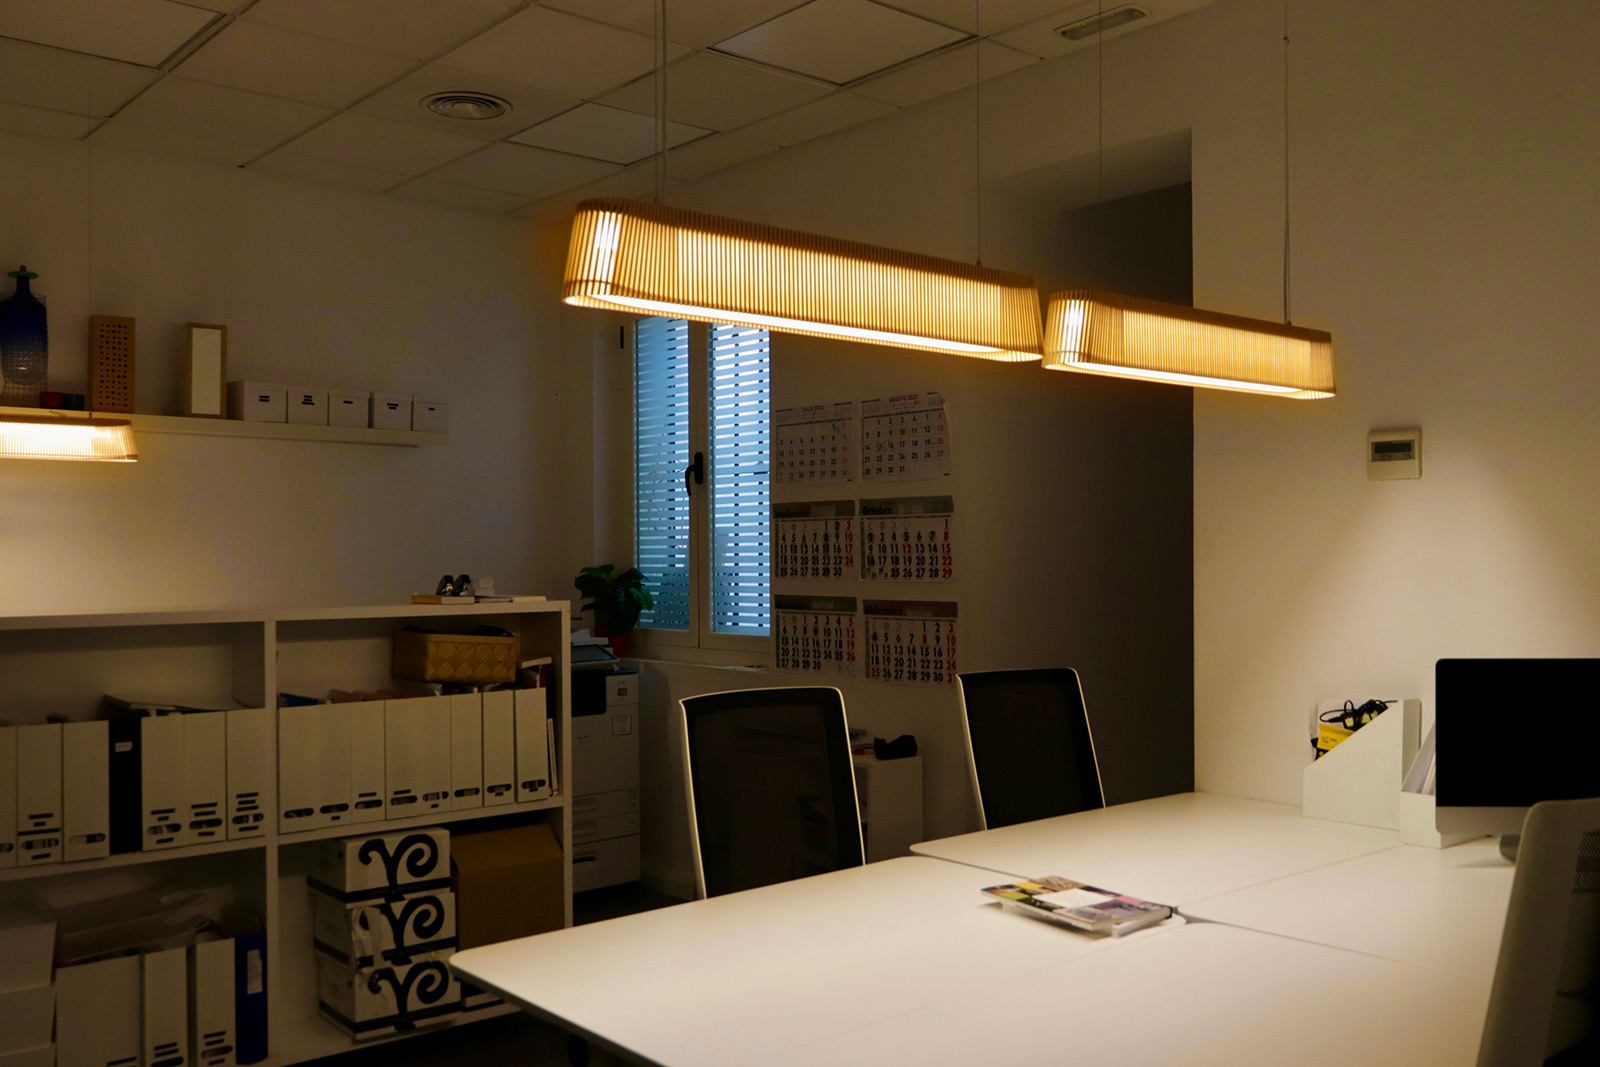 An office lit with three elongated pendant lamps.